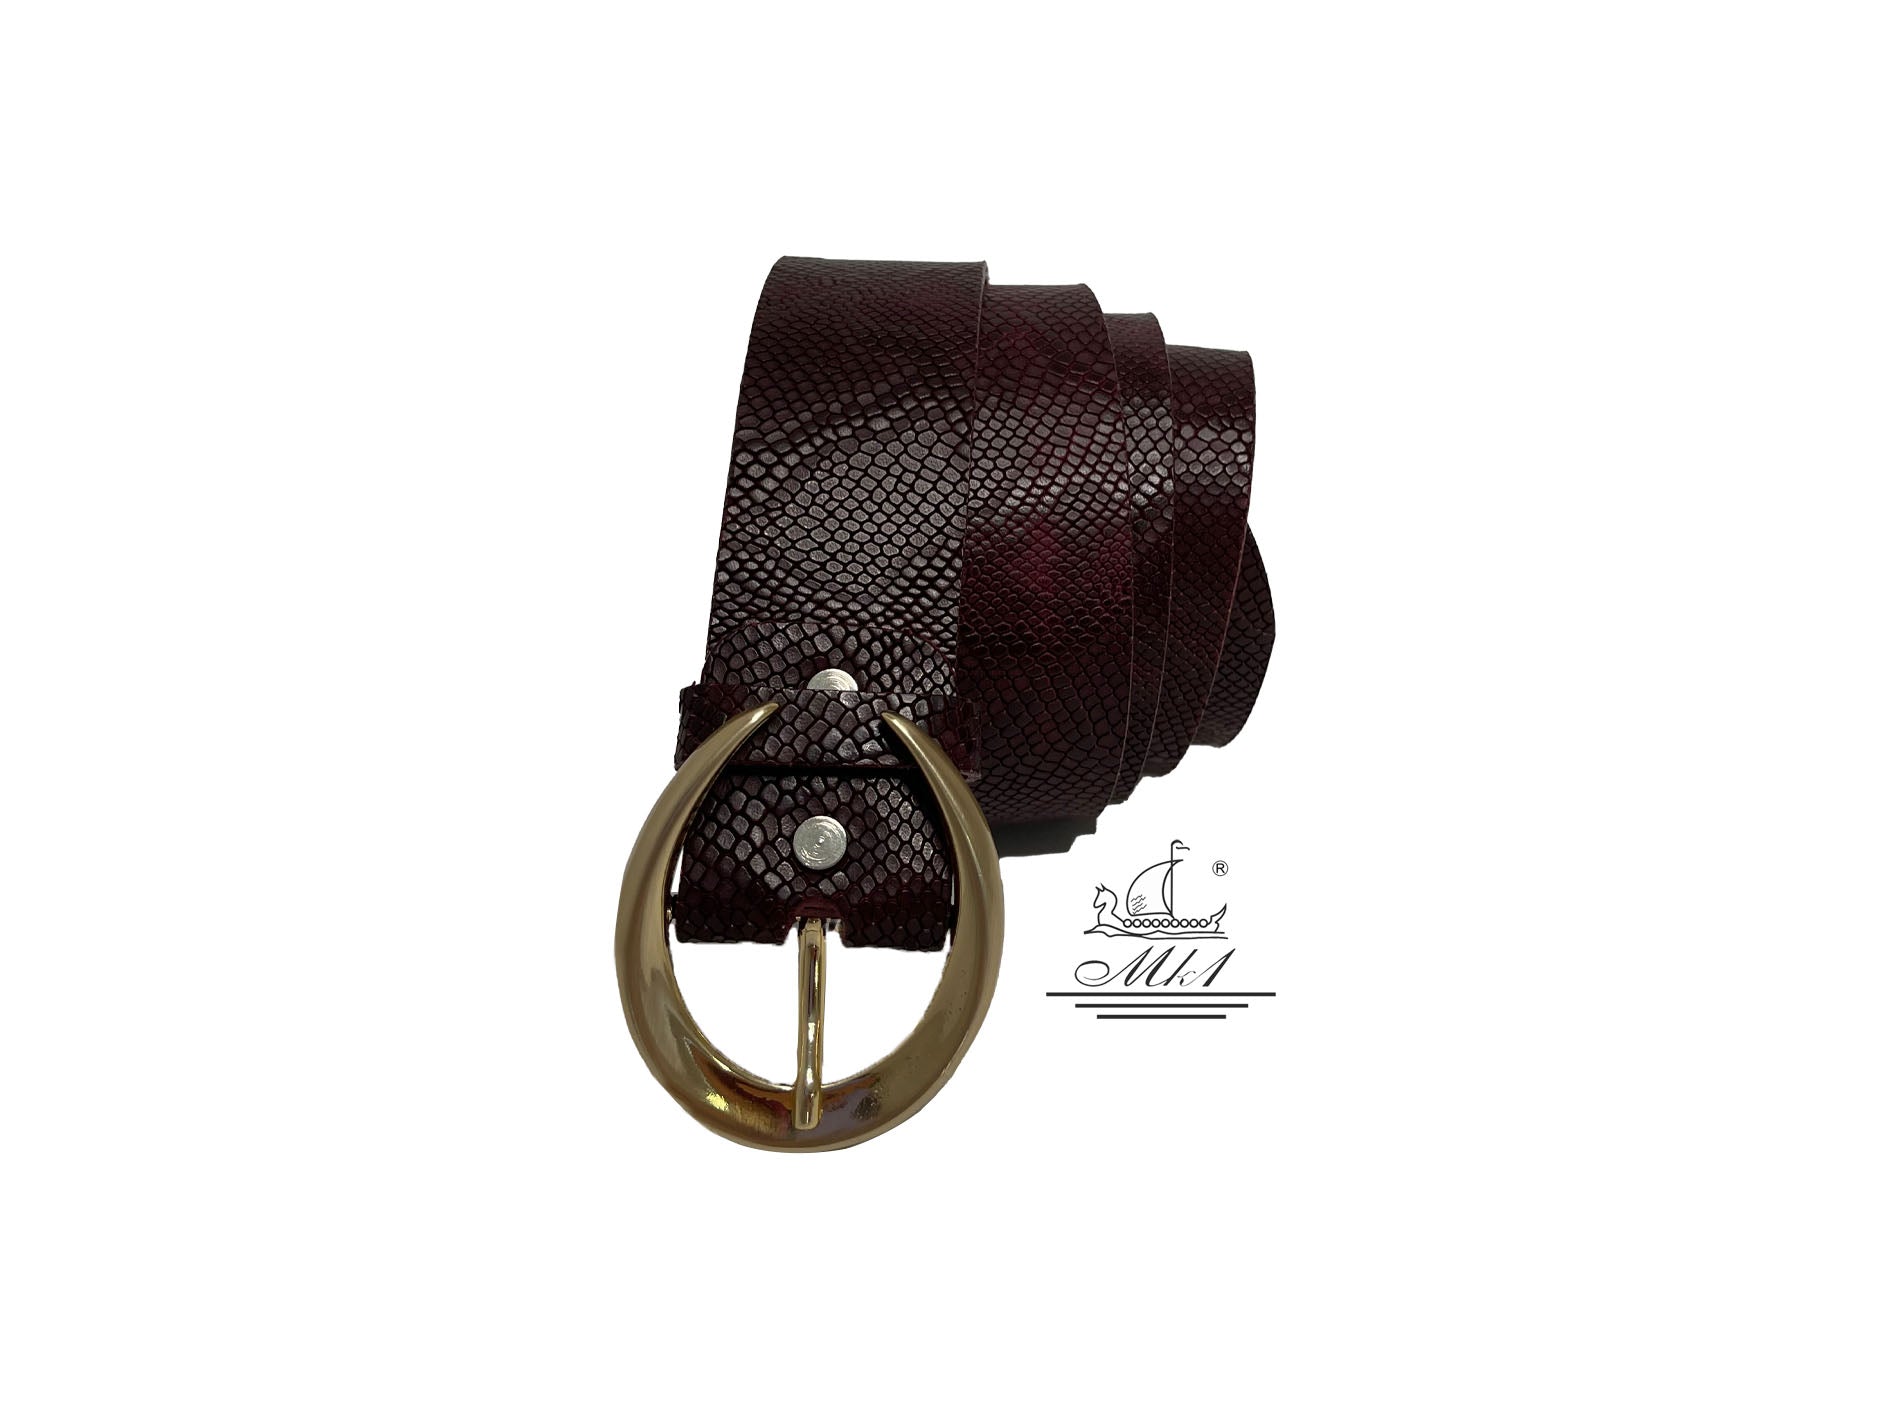 Unisex 4cm wide belt handcrafted from burgundy colour leather with snake design. 101589/40BG/FD